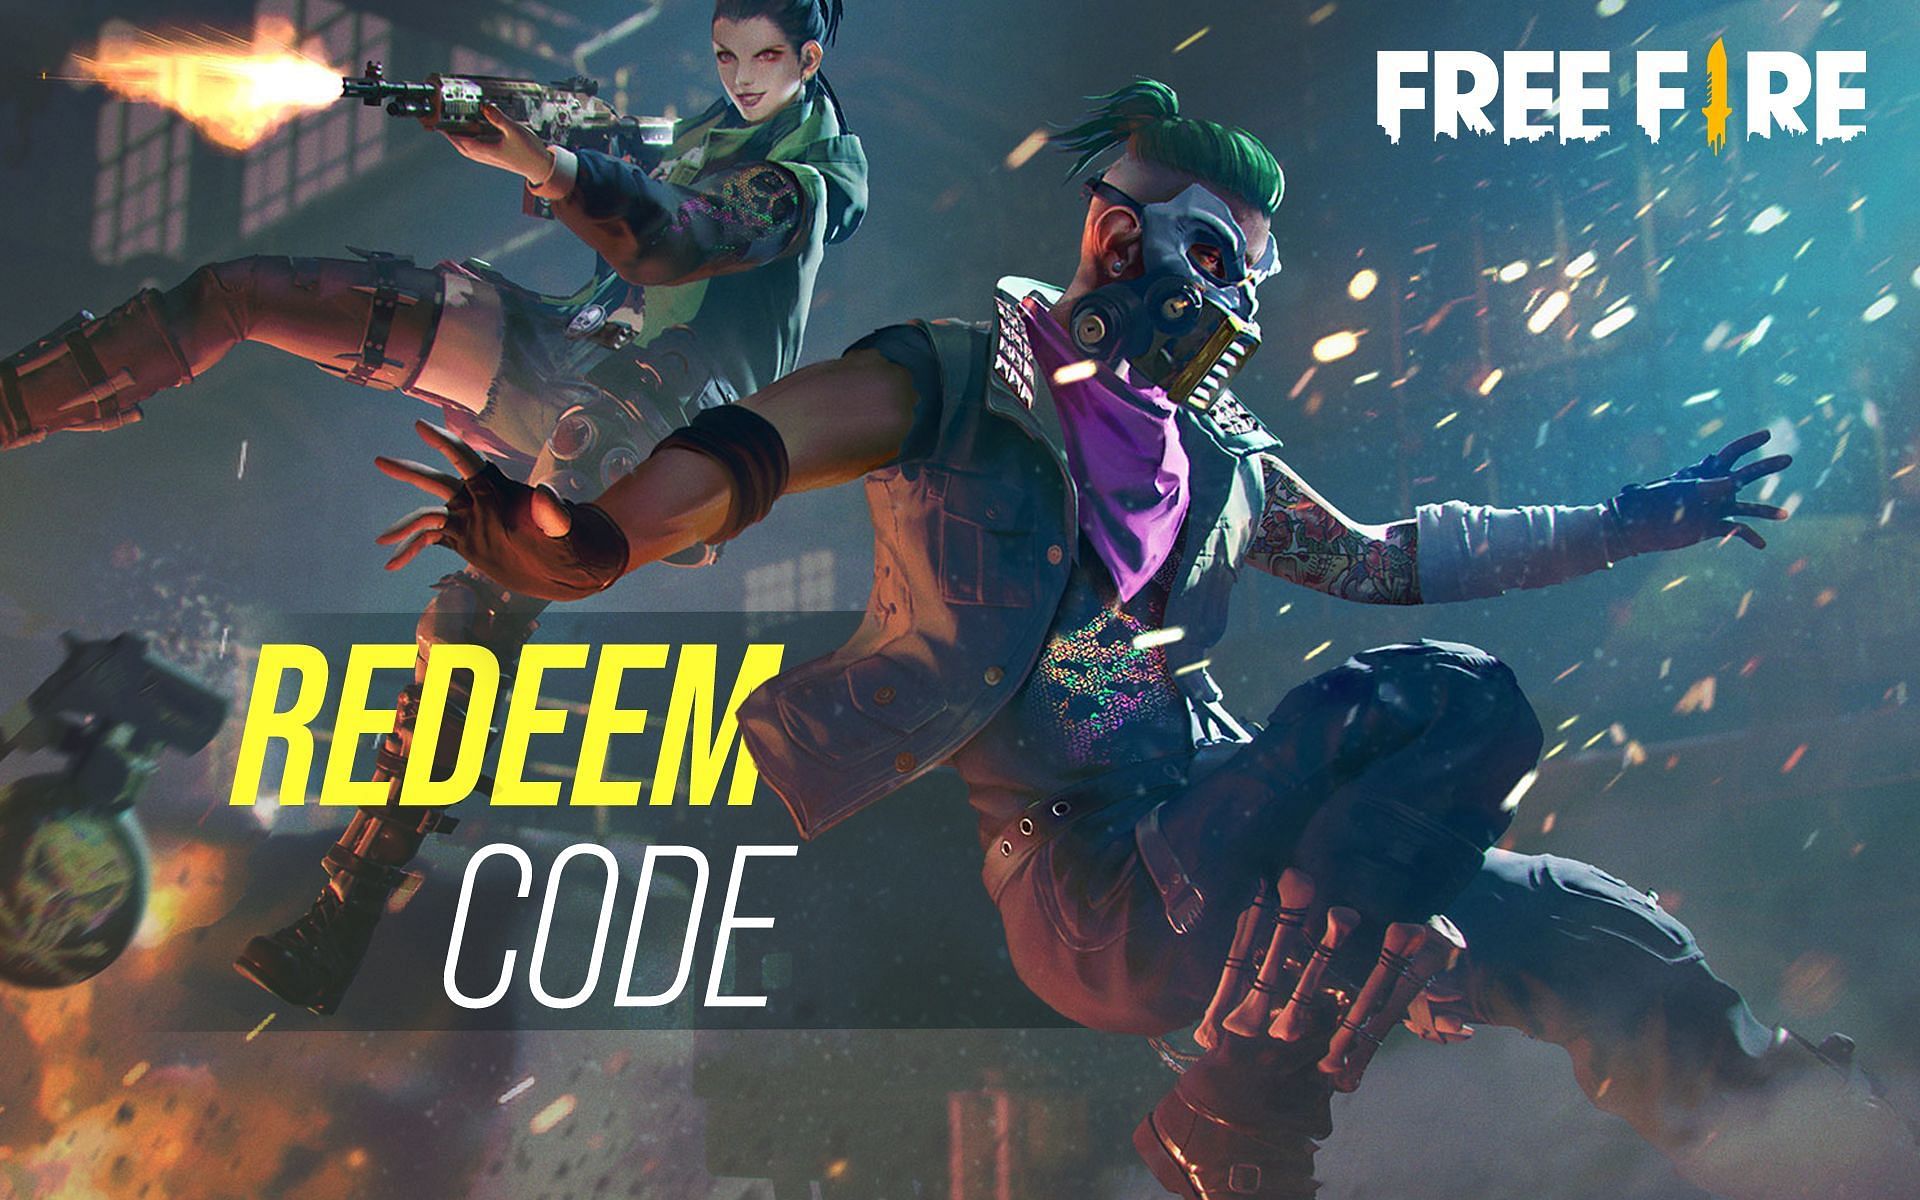 Free Fire redeem codes can give special rewards for no cost (Image via Sportskeeda)